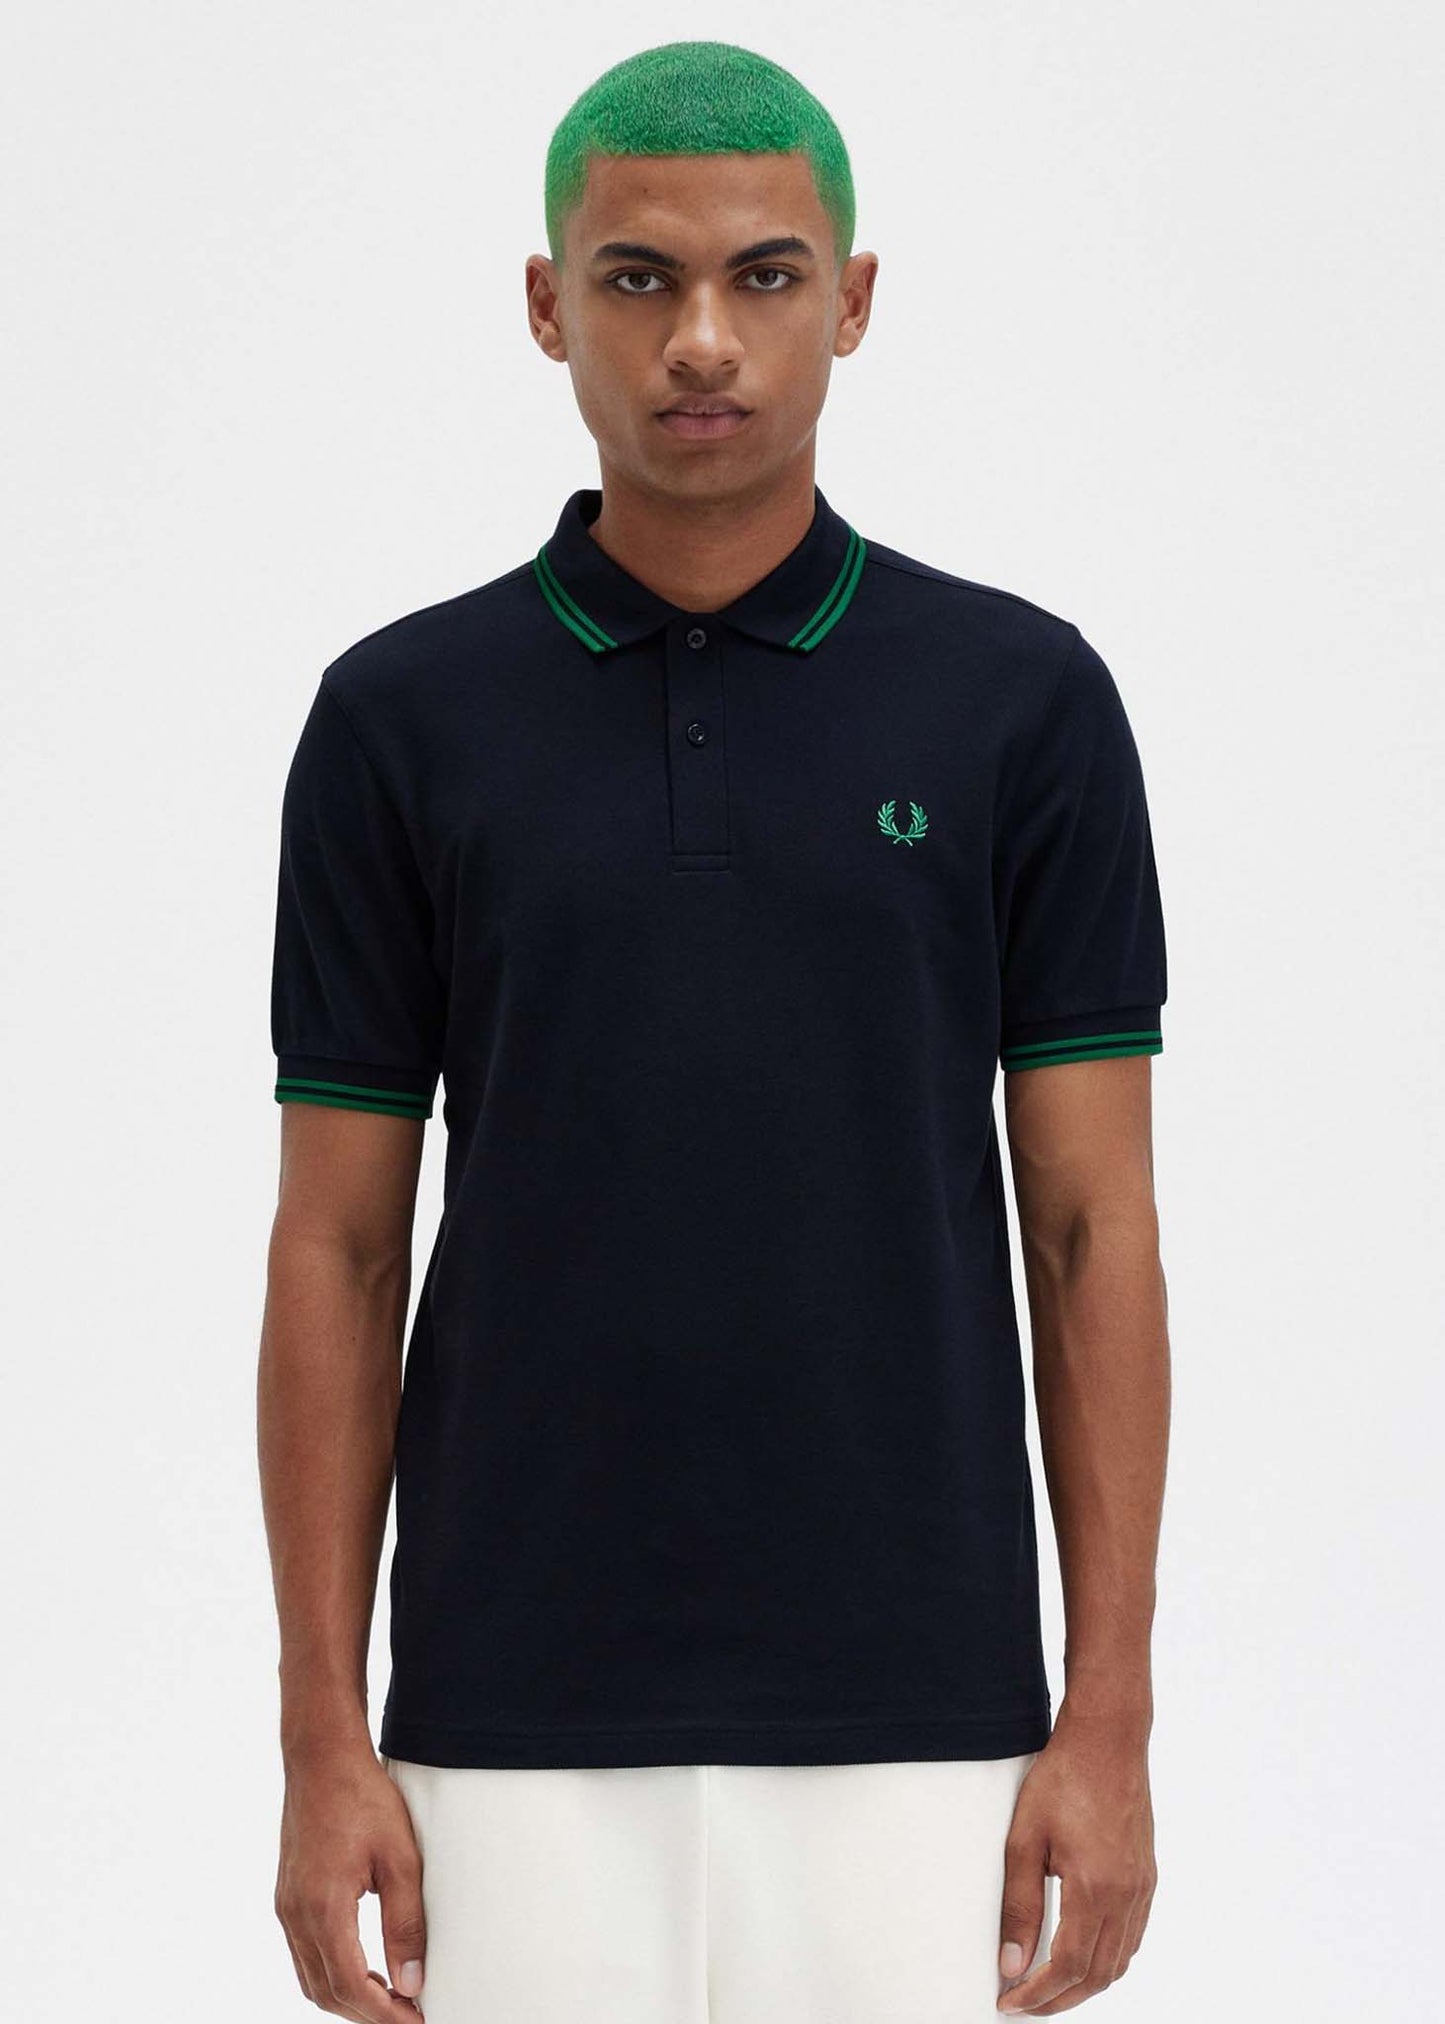 Twin tipped fred perry shirt - navy fp green